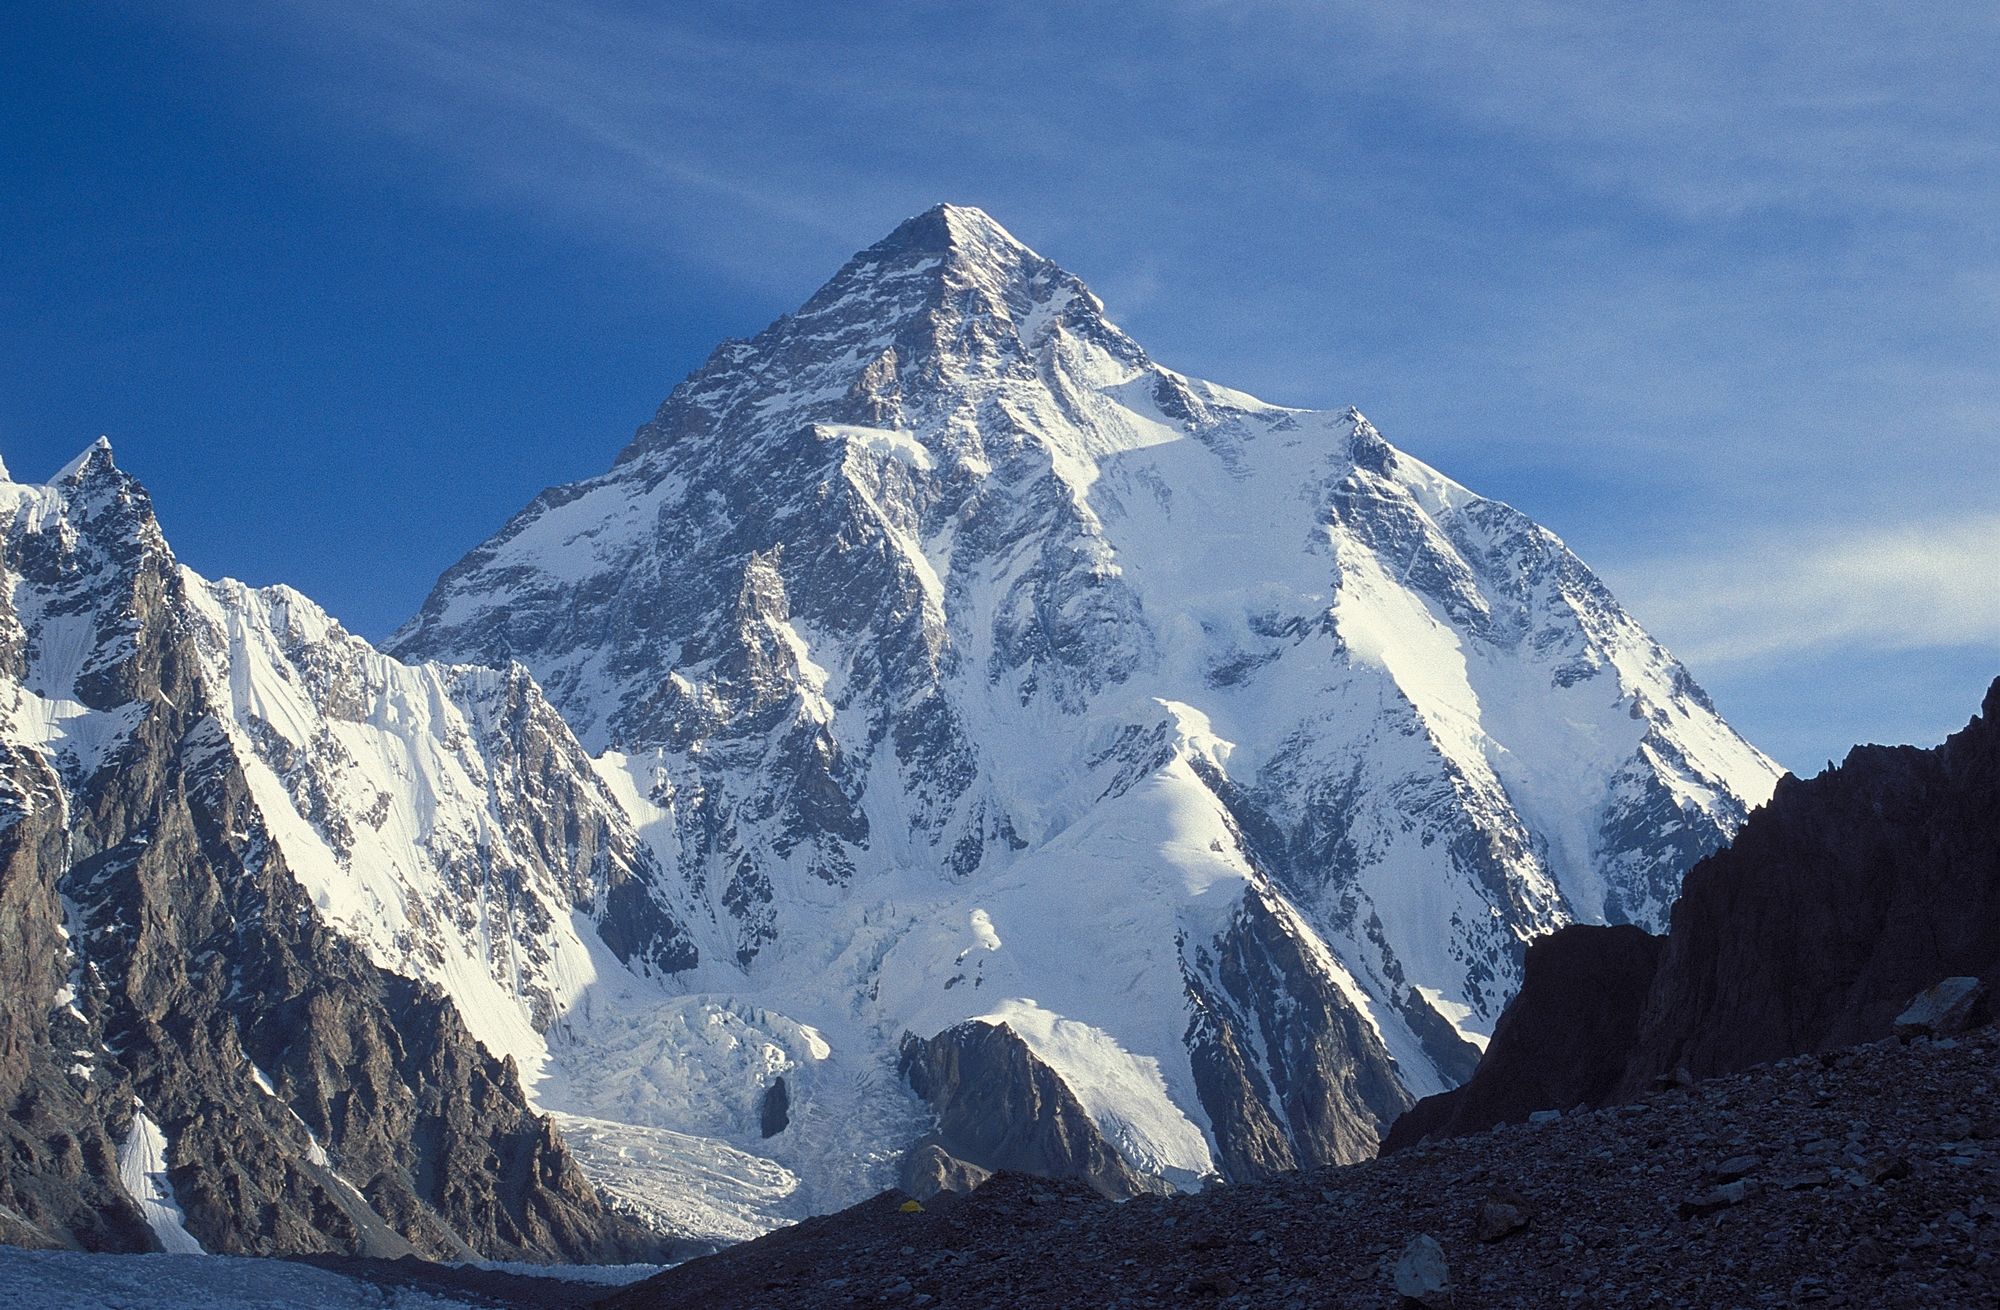 South side of K2, world's second highest peak | The View from Here ...